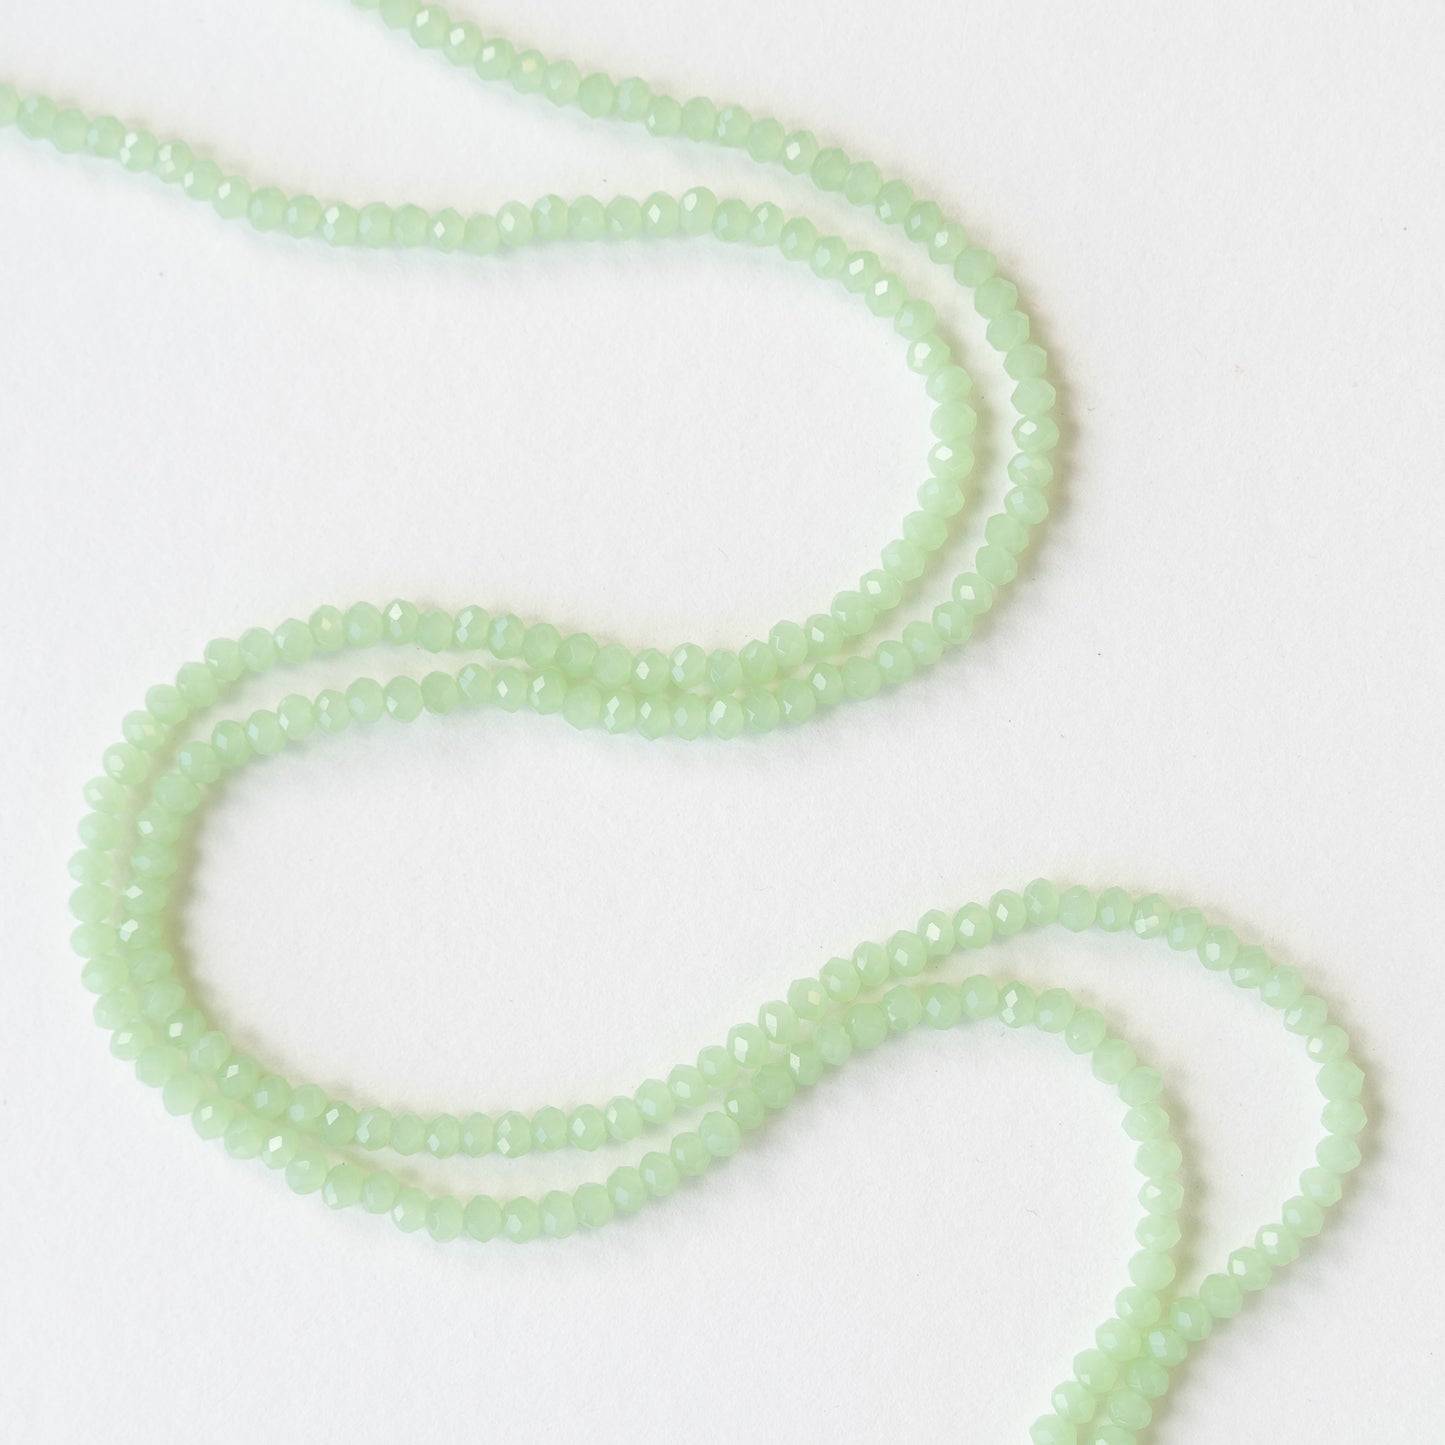 3x2mm Faceted Glass Rondelle Beads - Summery Light Green - 16 Inches ~ 200 Beads